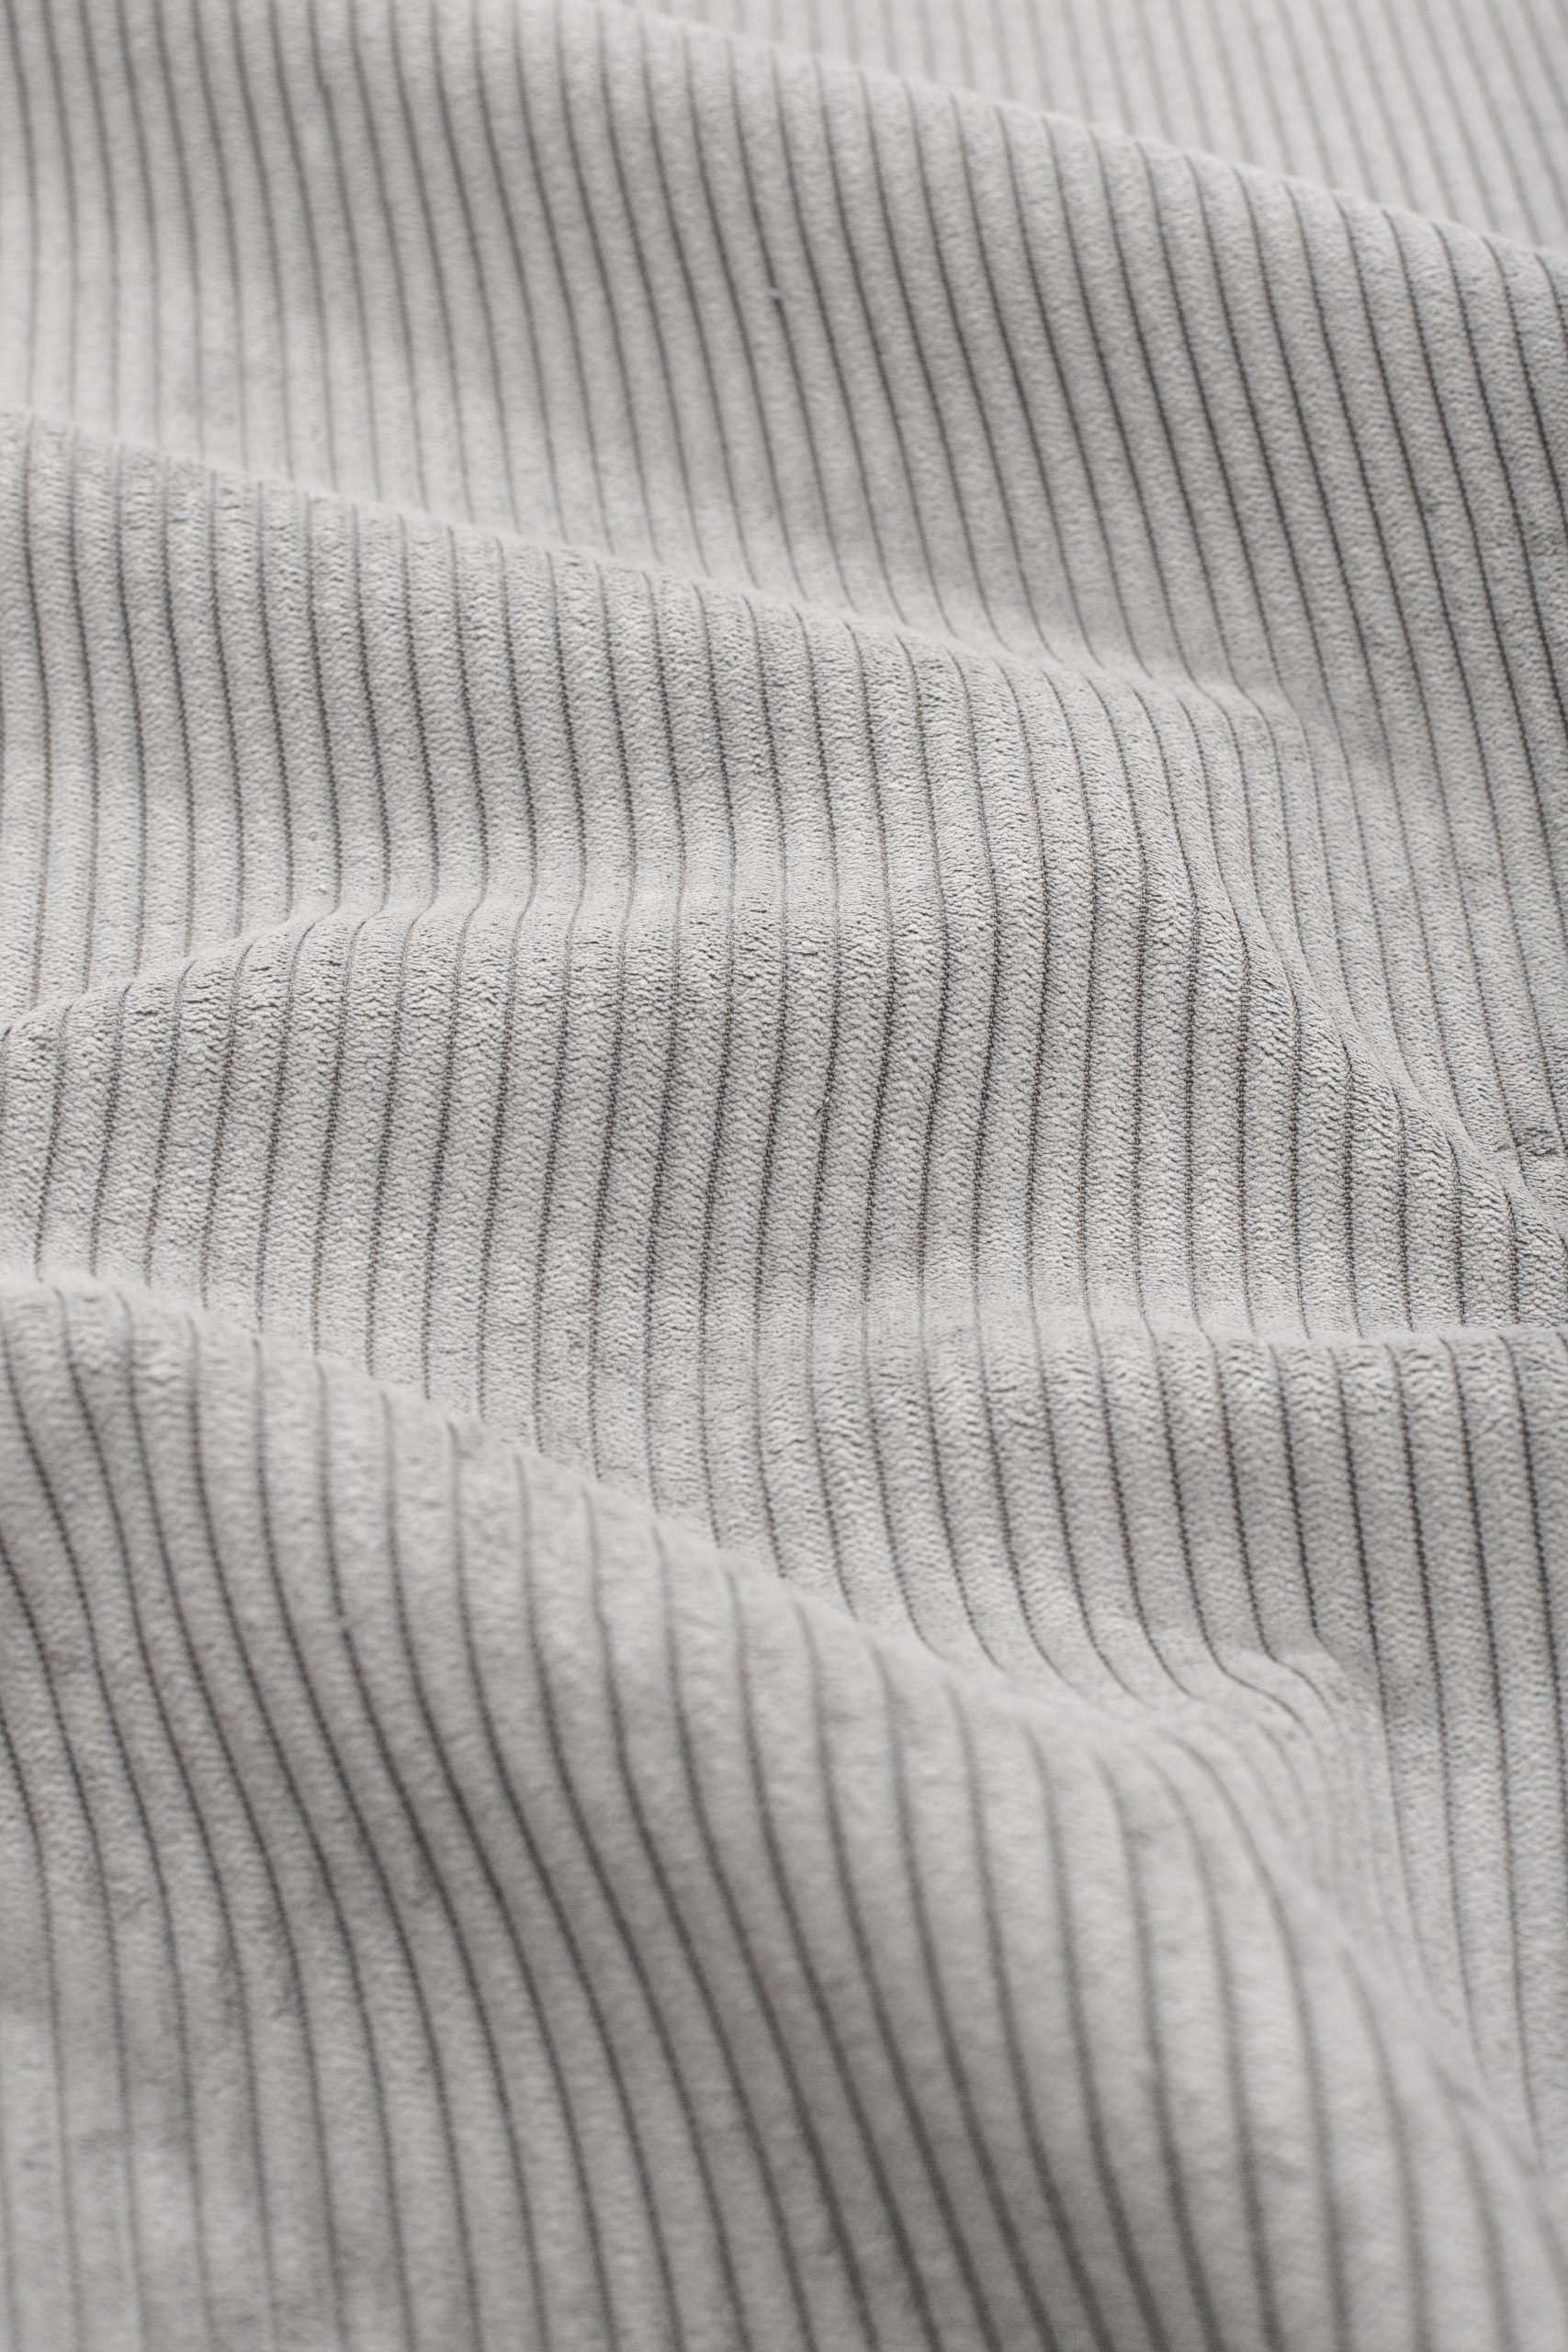 Relaxed Plains Lazy Whisper Fabric